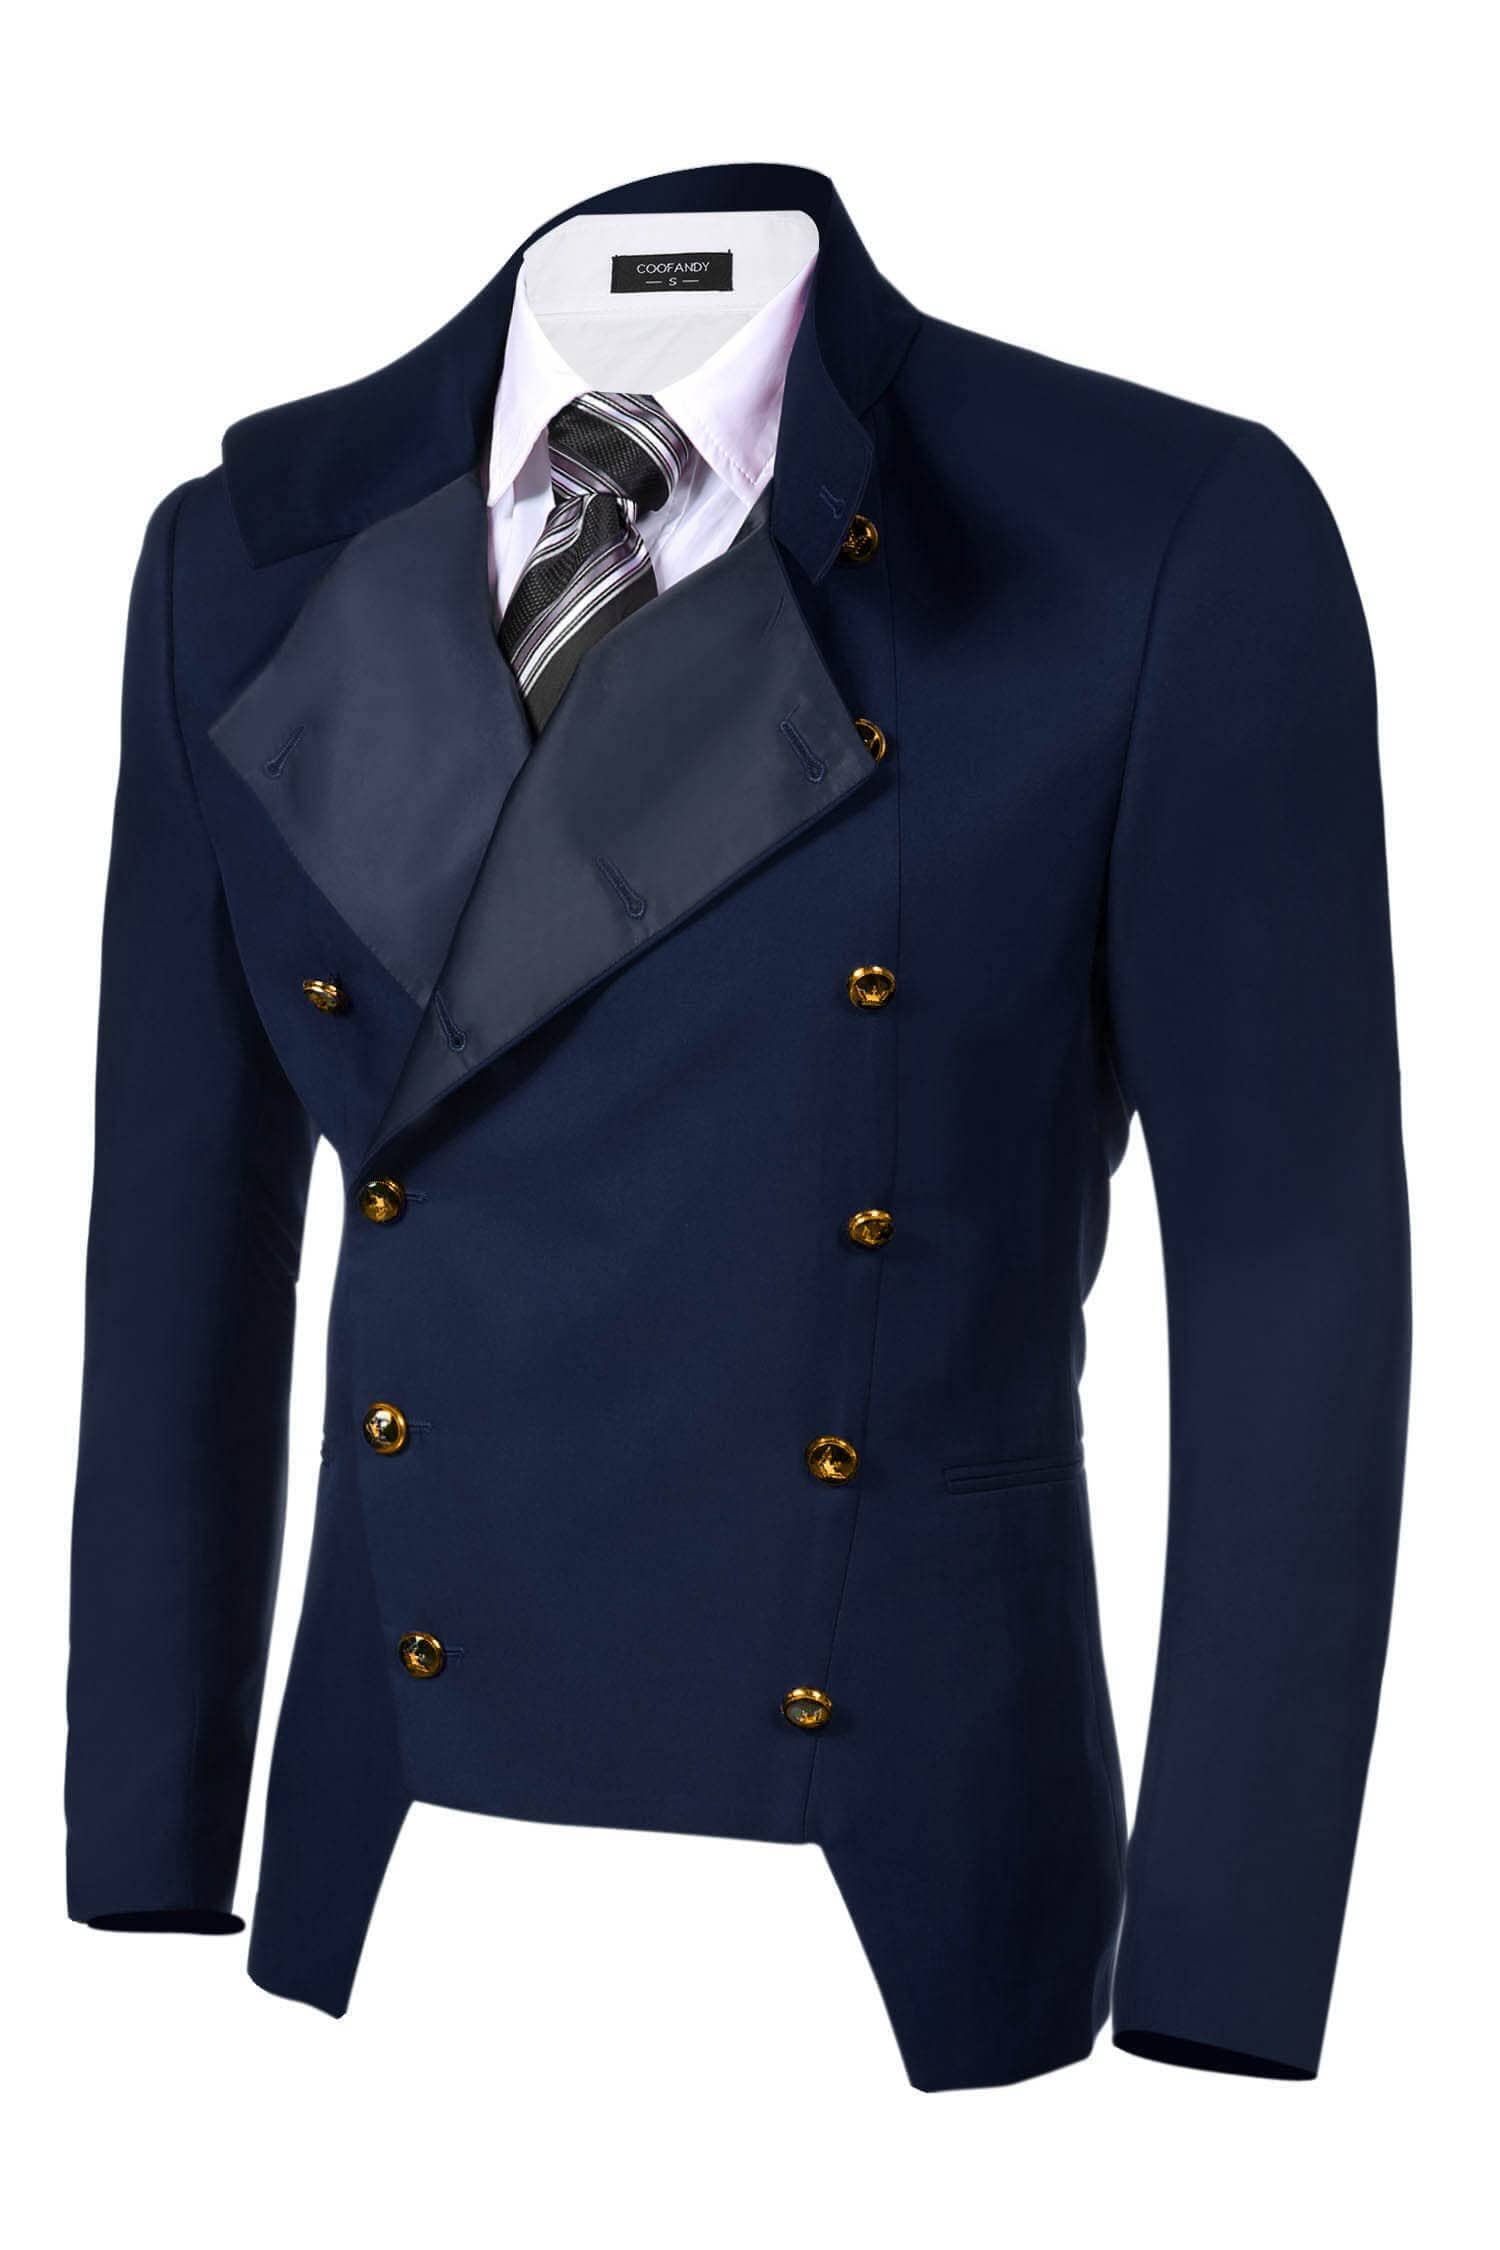 Coofandy Double-Breasted Blazer (US Only) Blazer coofandy Navy Blue S 